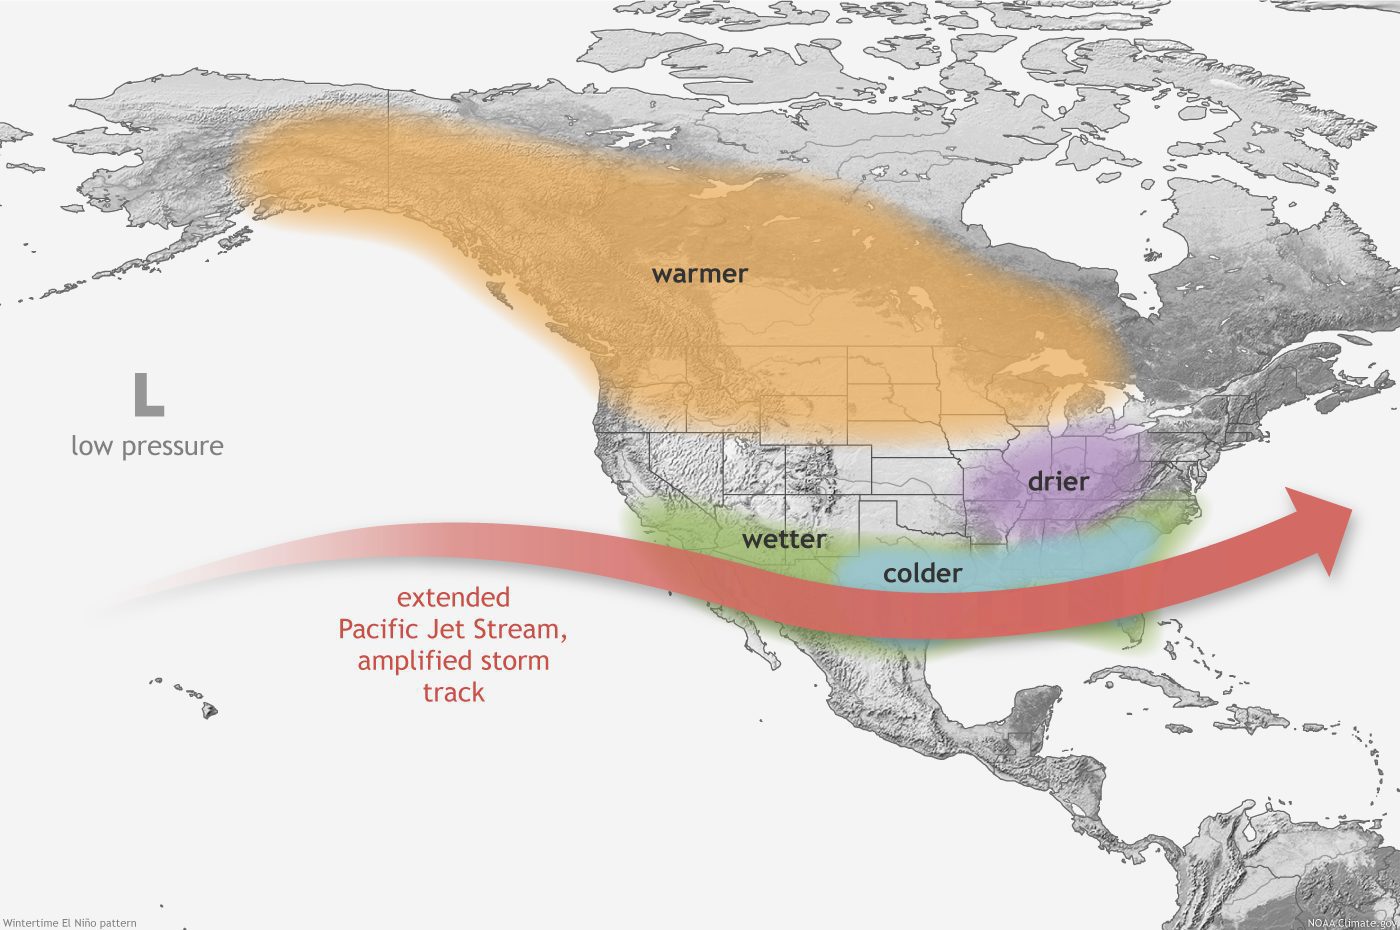 Heat, Floods, Fires, & New Shipping Lanes: Blame The Jet Stream